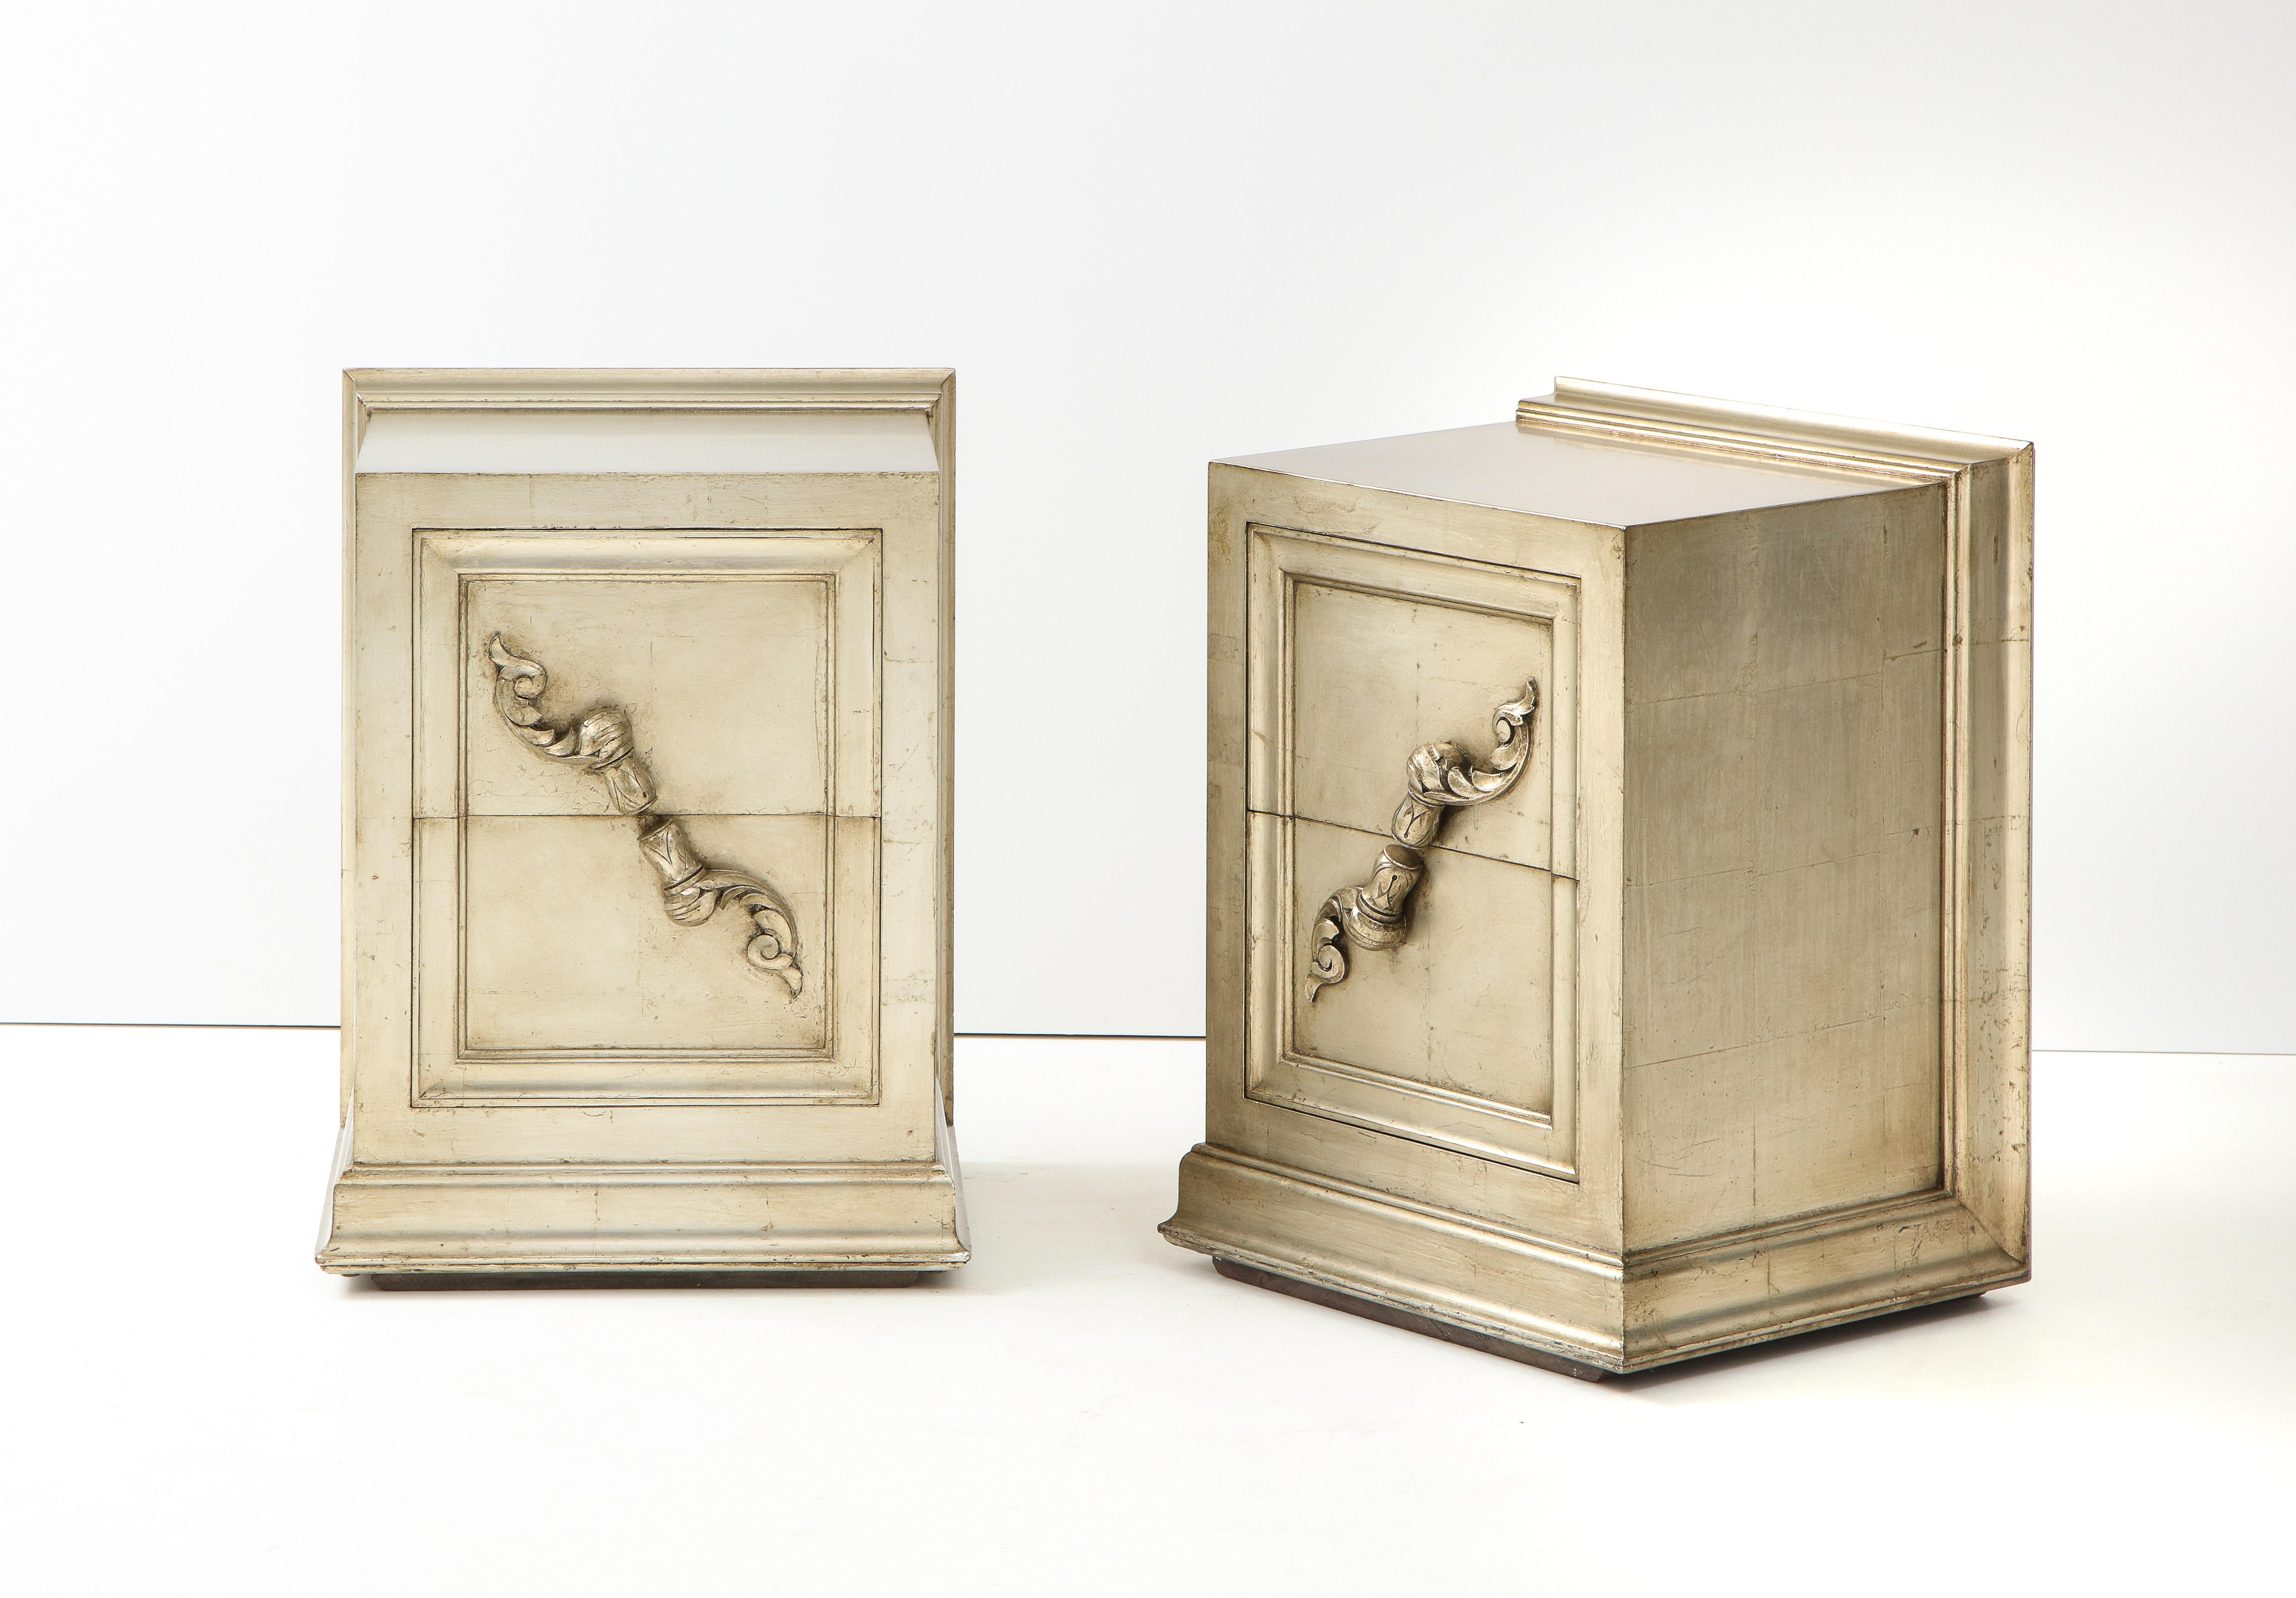 Spectacular Pair of Rare James Mont Scroll Cabinets For Sale at 1stDibs